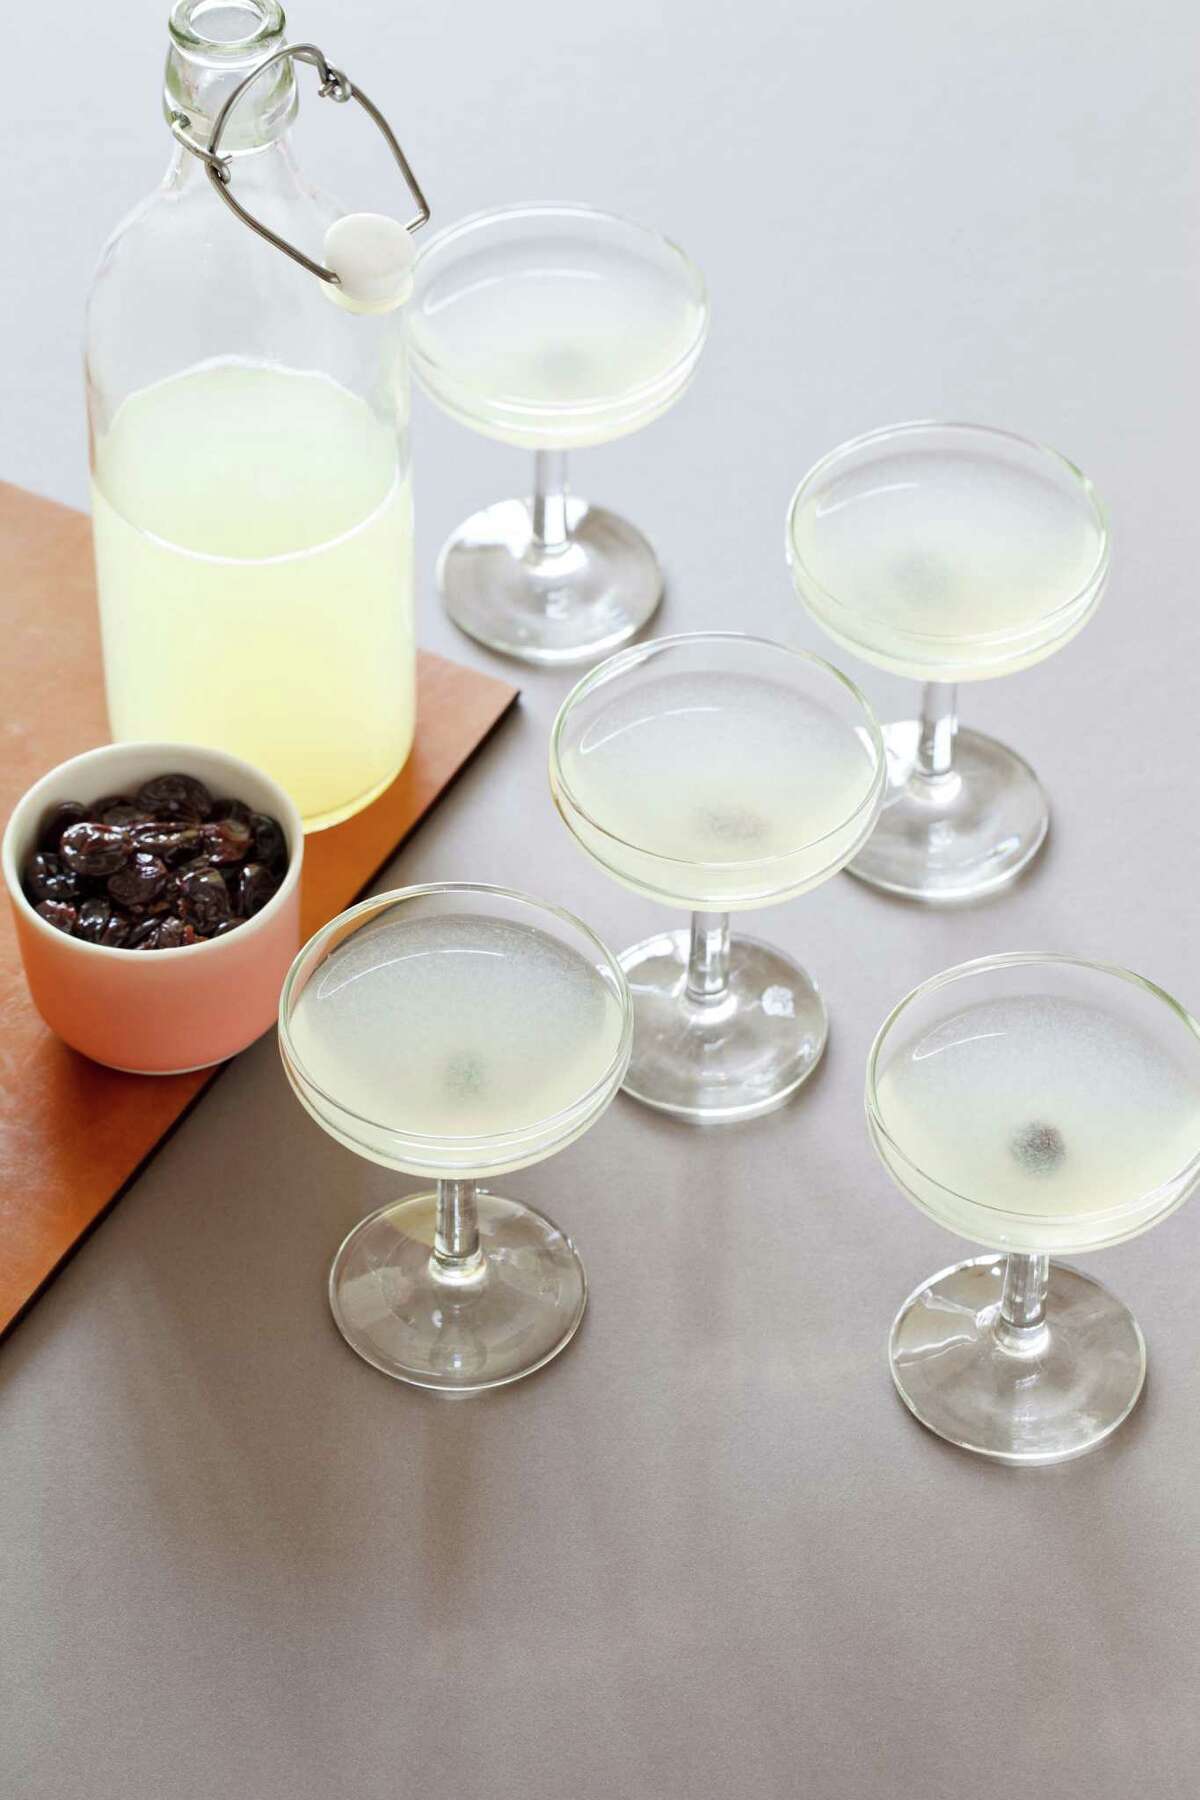 The recipes for the classic Aviation Cocktail and the brandied cherries are included in “Cocktails for a Crowd.”